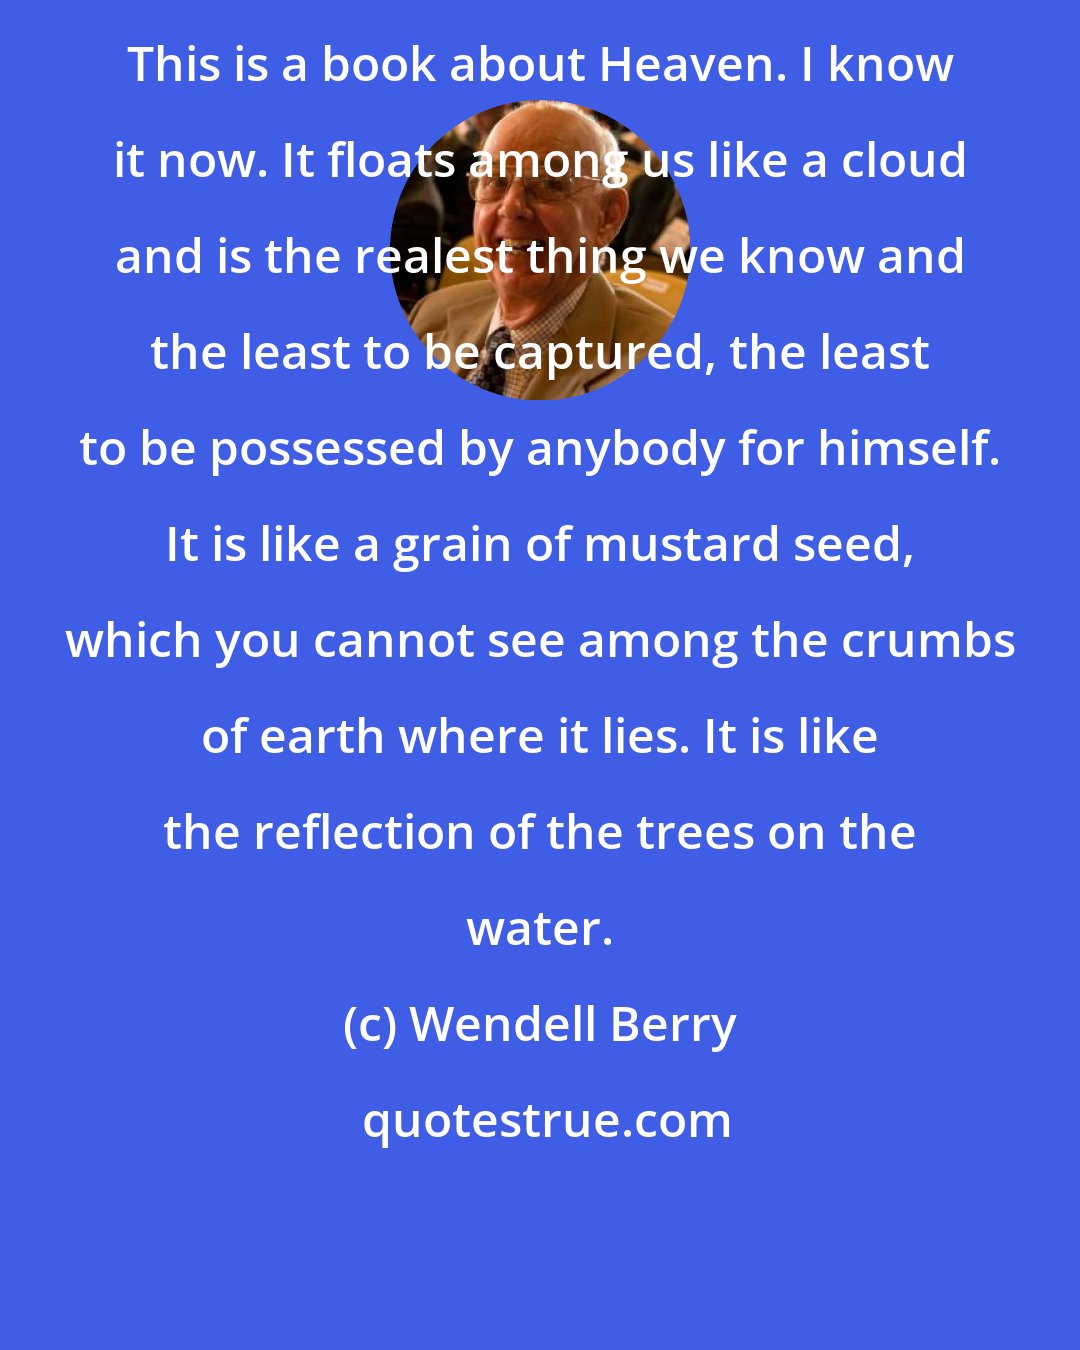 Wendell Berry: This is a book about Heaven. I know it now. It floats among us like a cloud and is the realest thing we know and the least to be captured, the least to be possessed by anybody for himself. It is like a grain of mustard seed, which you cannot see among the crumbs of earth where it lies. It is like the reflection of the trees on the water.